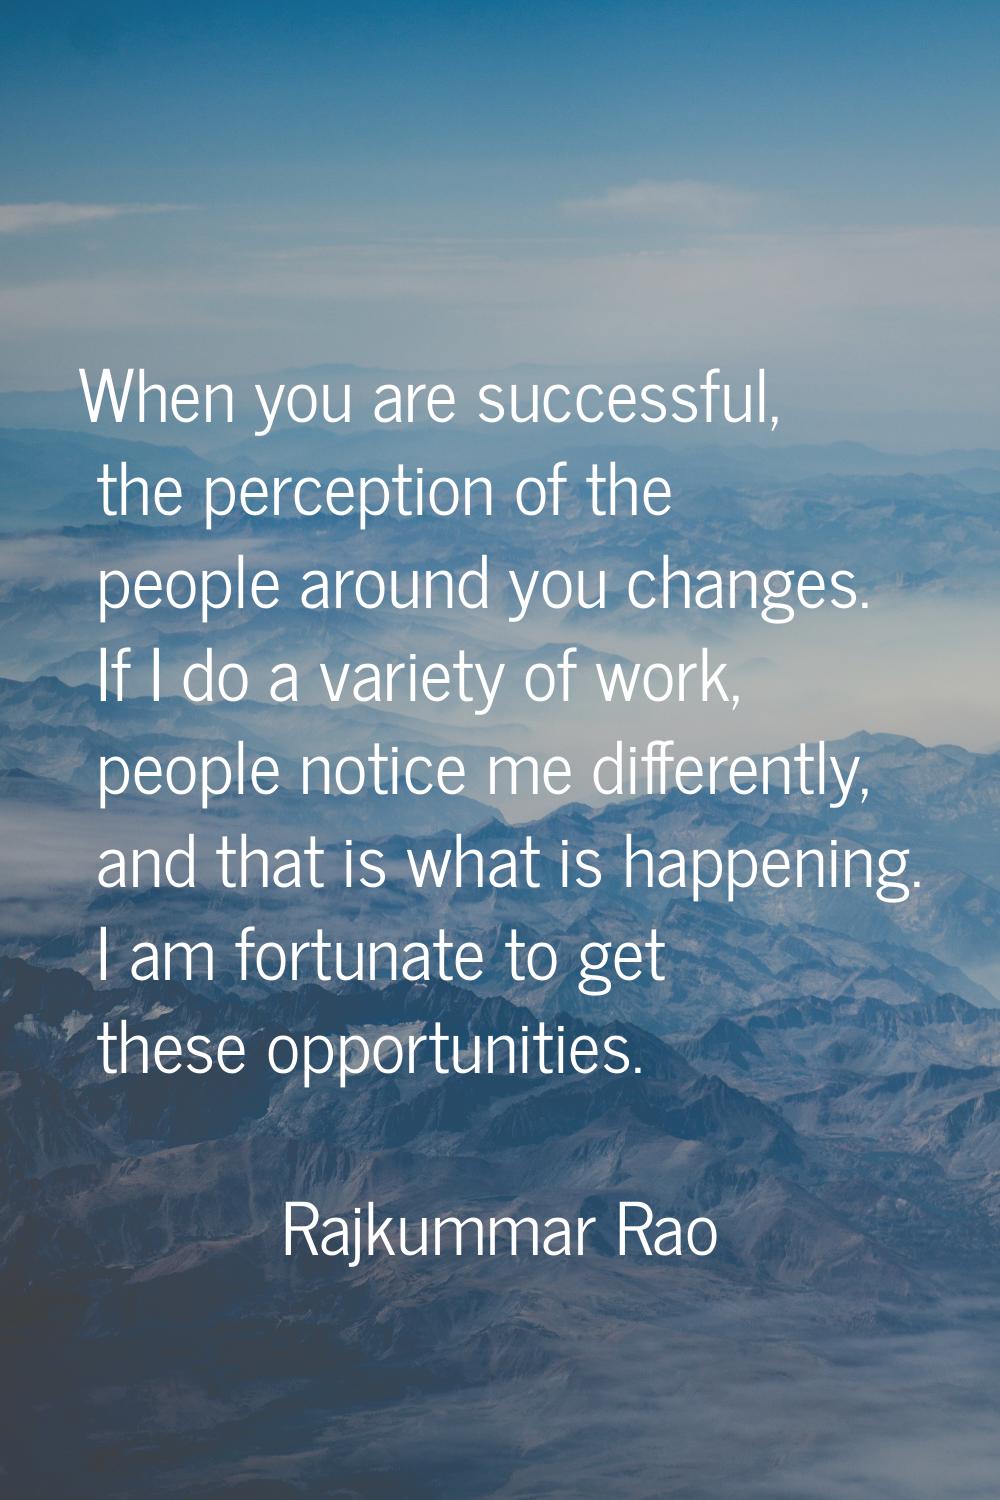 When you are successful, the perception of the people around you changes. If I do a variety of work